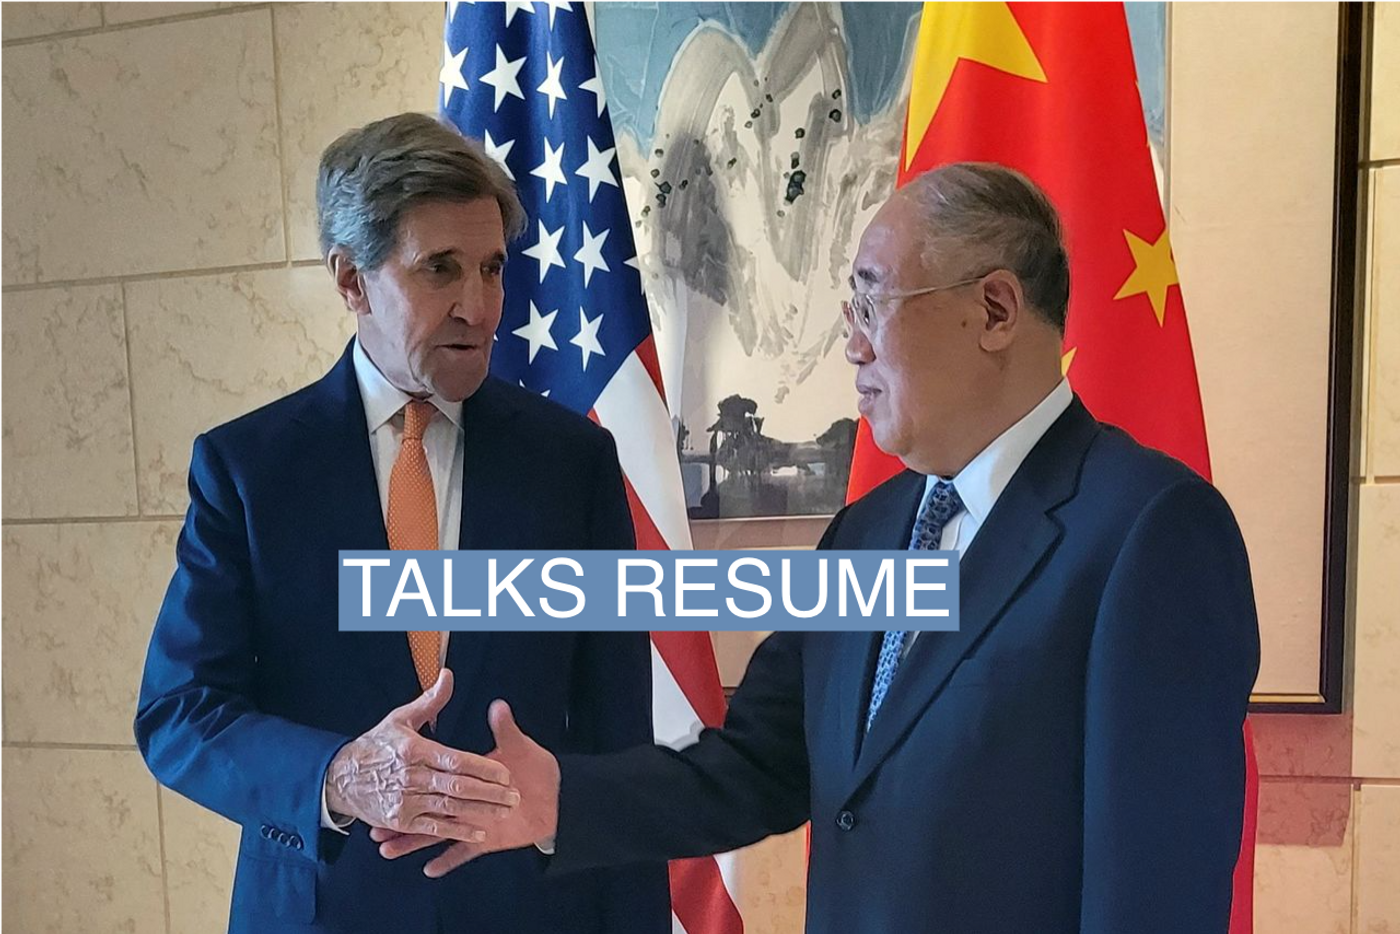 U.S. Special Presidential Envoy for Climate John Kerry shakes hands with his Chinese counterpart Xie Zhenhua before a meeting in Beijing, China July 17, 2023. REUTERS/Valerie Volcovici